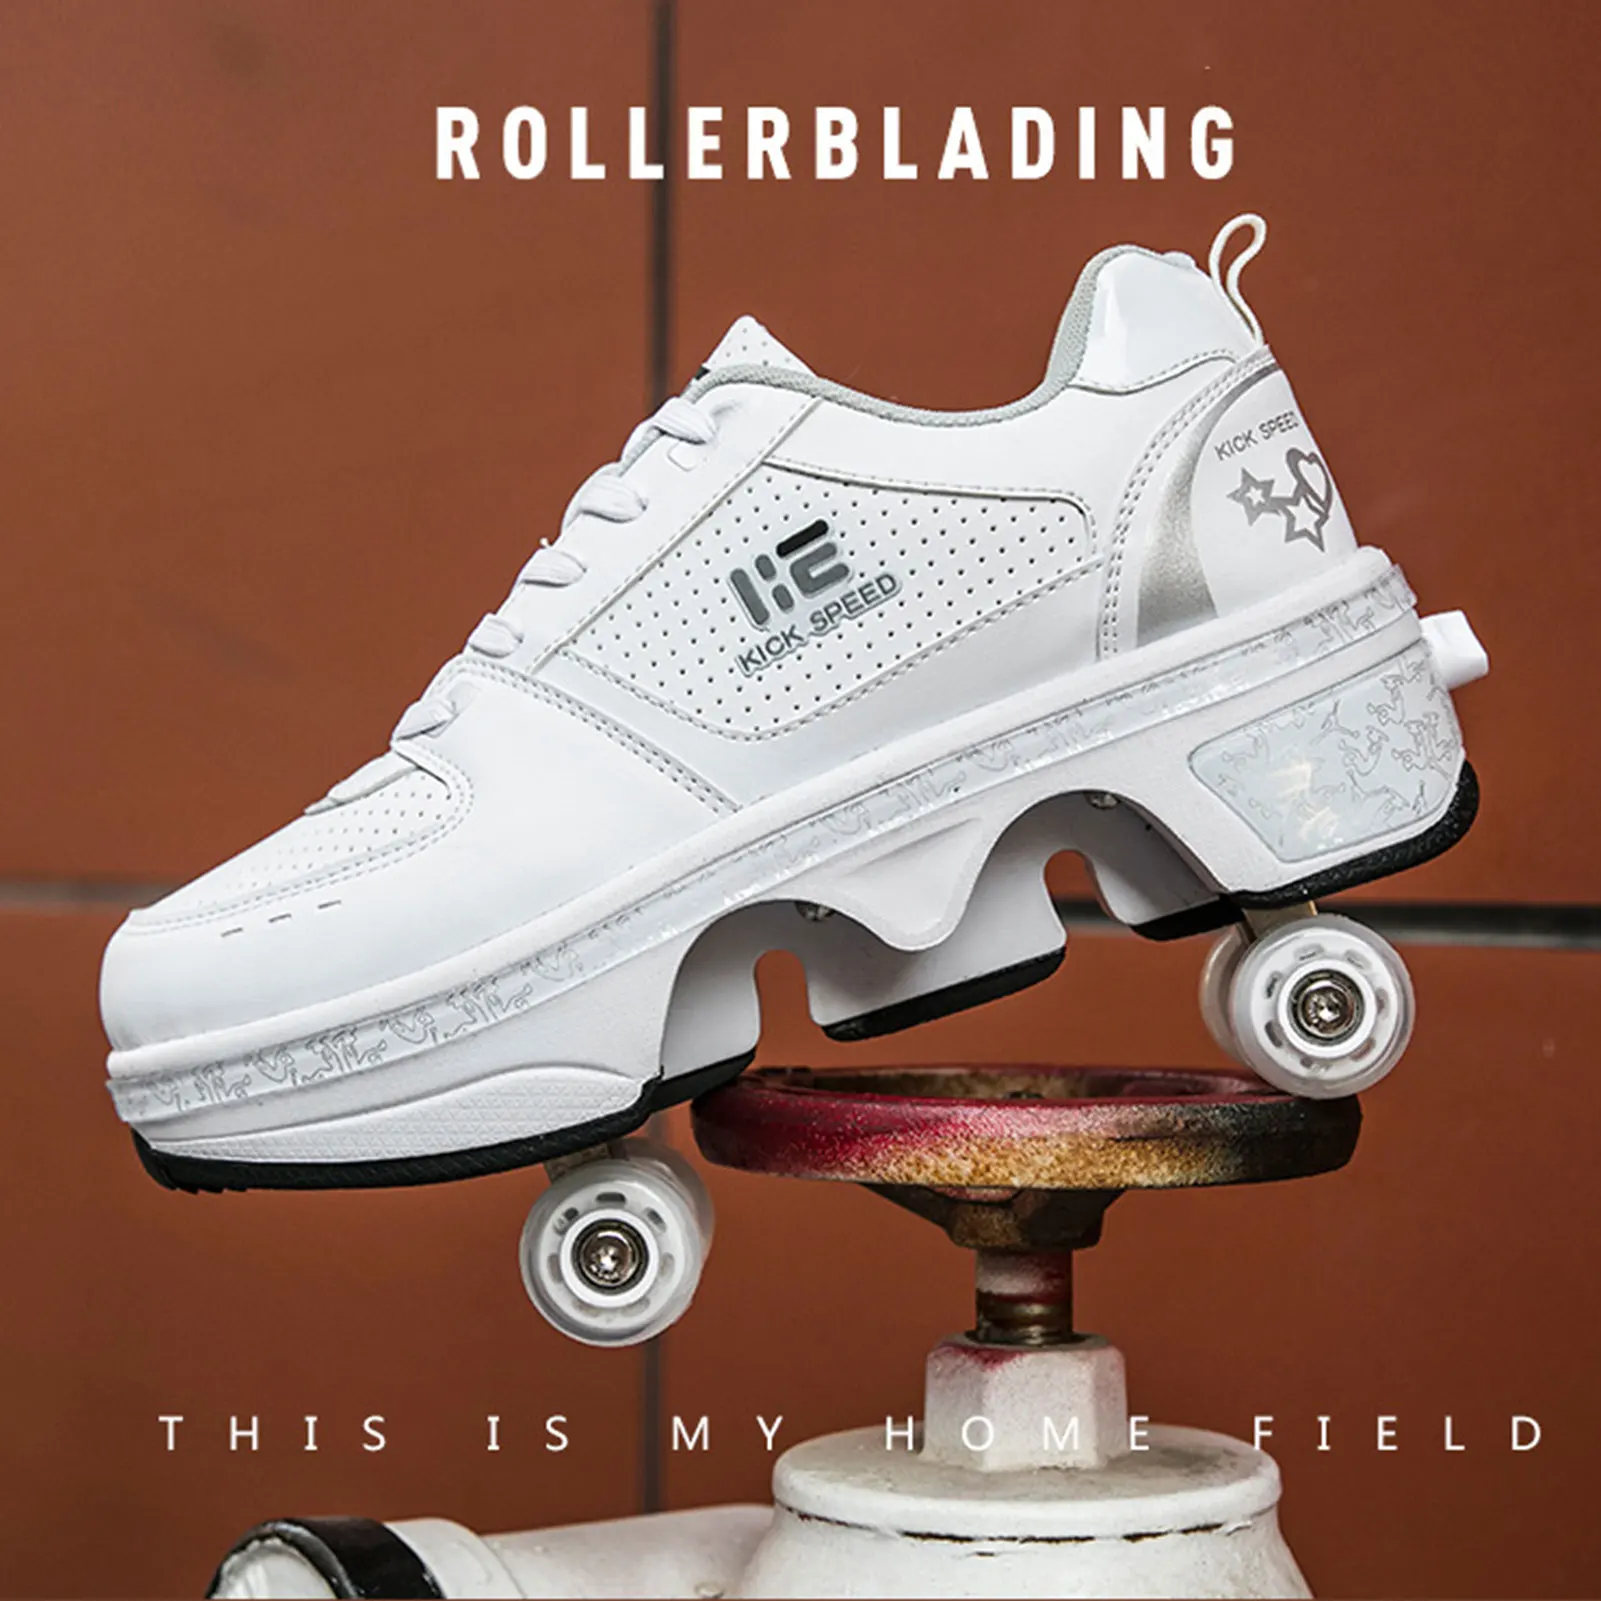 PU Wheel Deformation Roller Shoes Unisex Invisible Pulley Skating Shoes Four Wheels Rounds Parkour Shoes Breathable Sneakers